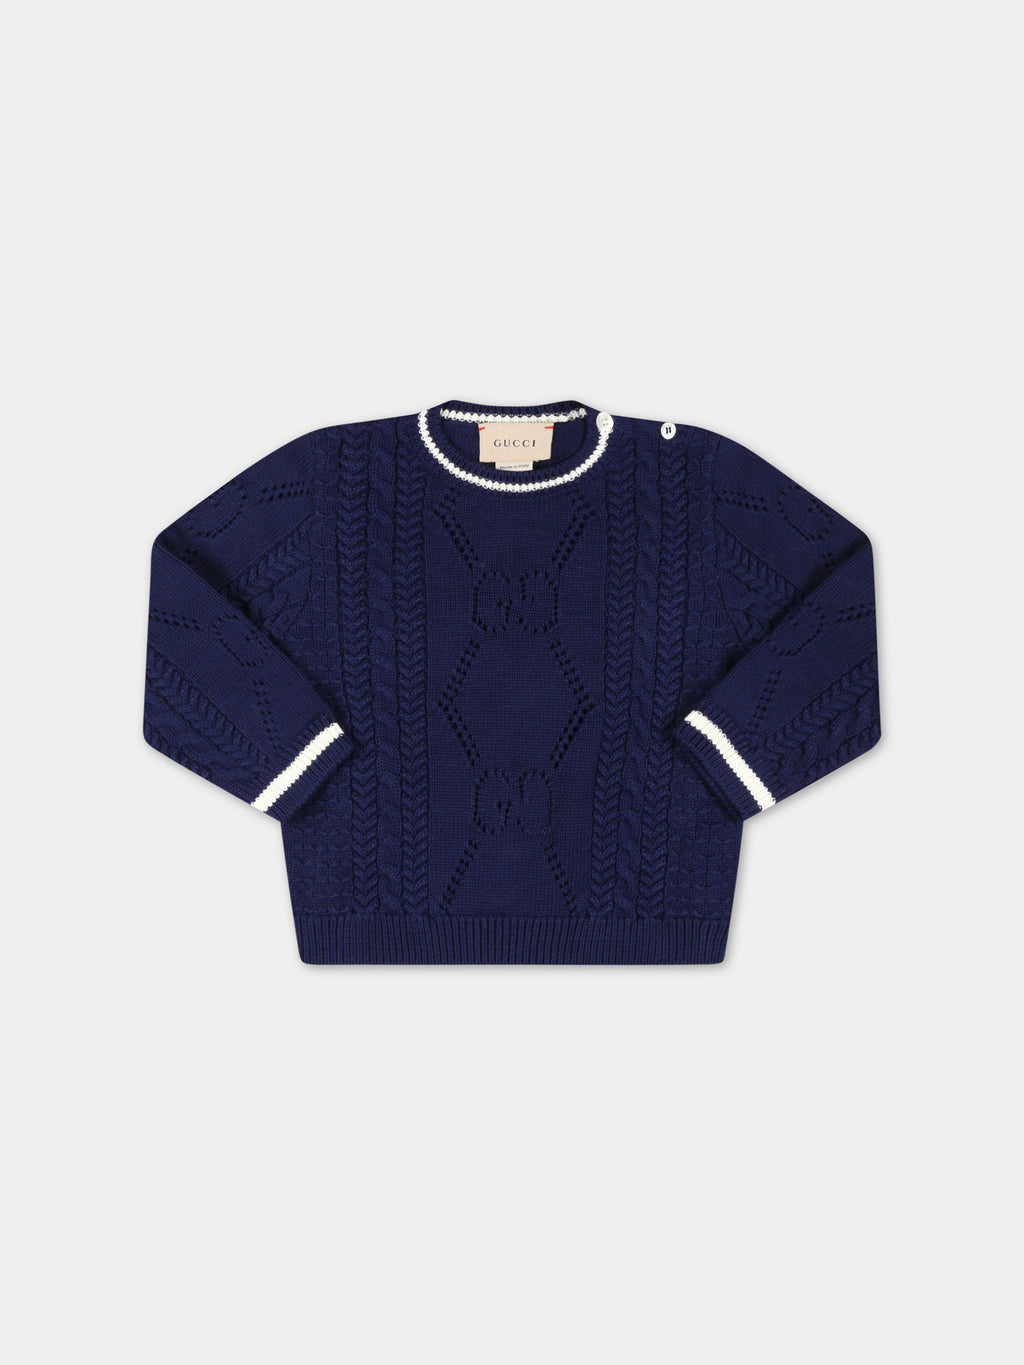 Blue sweater for baby boy with logo patch